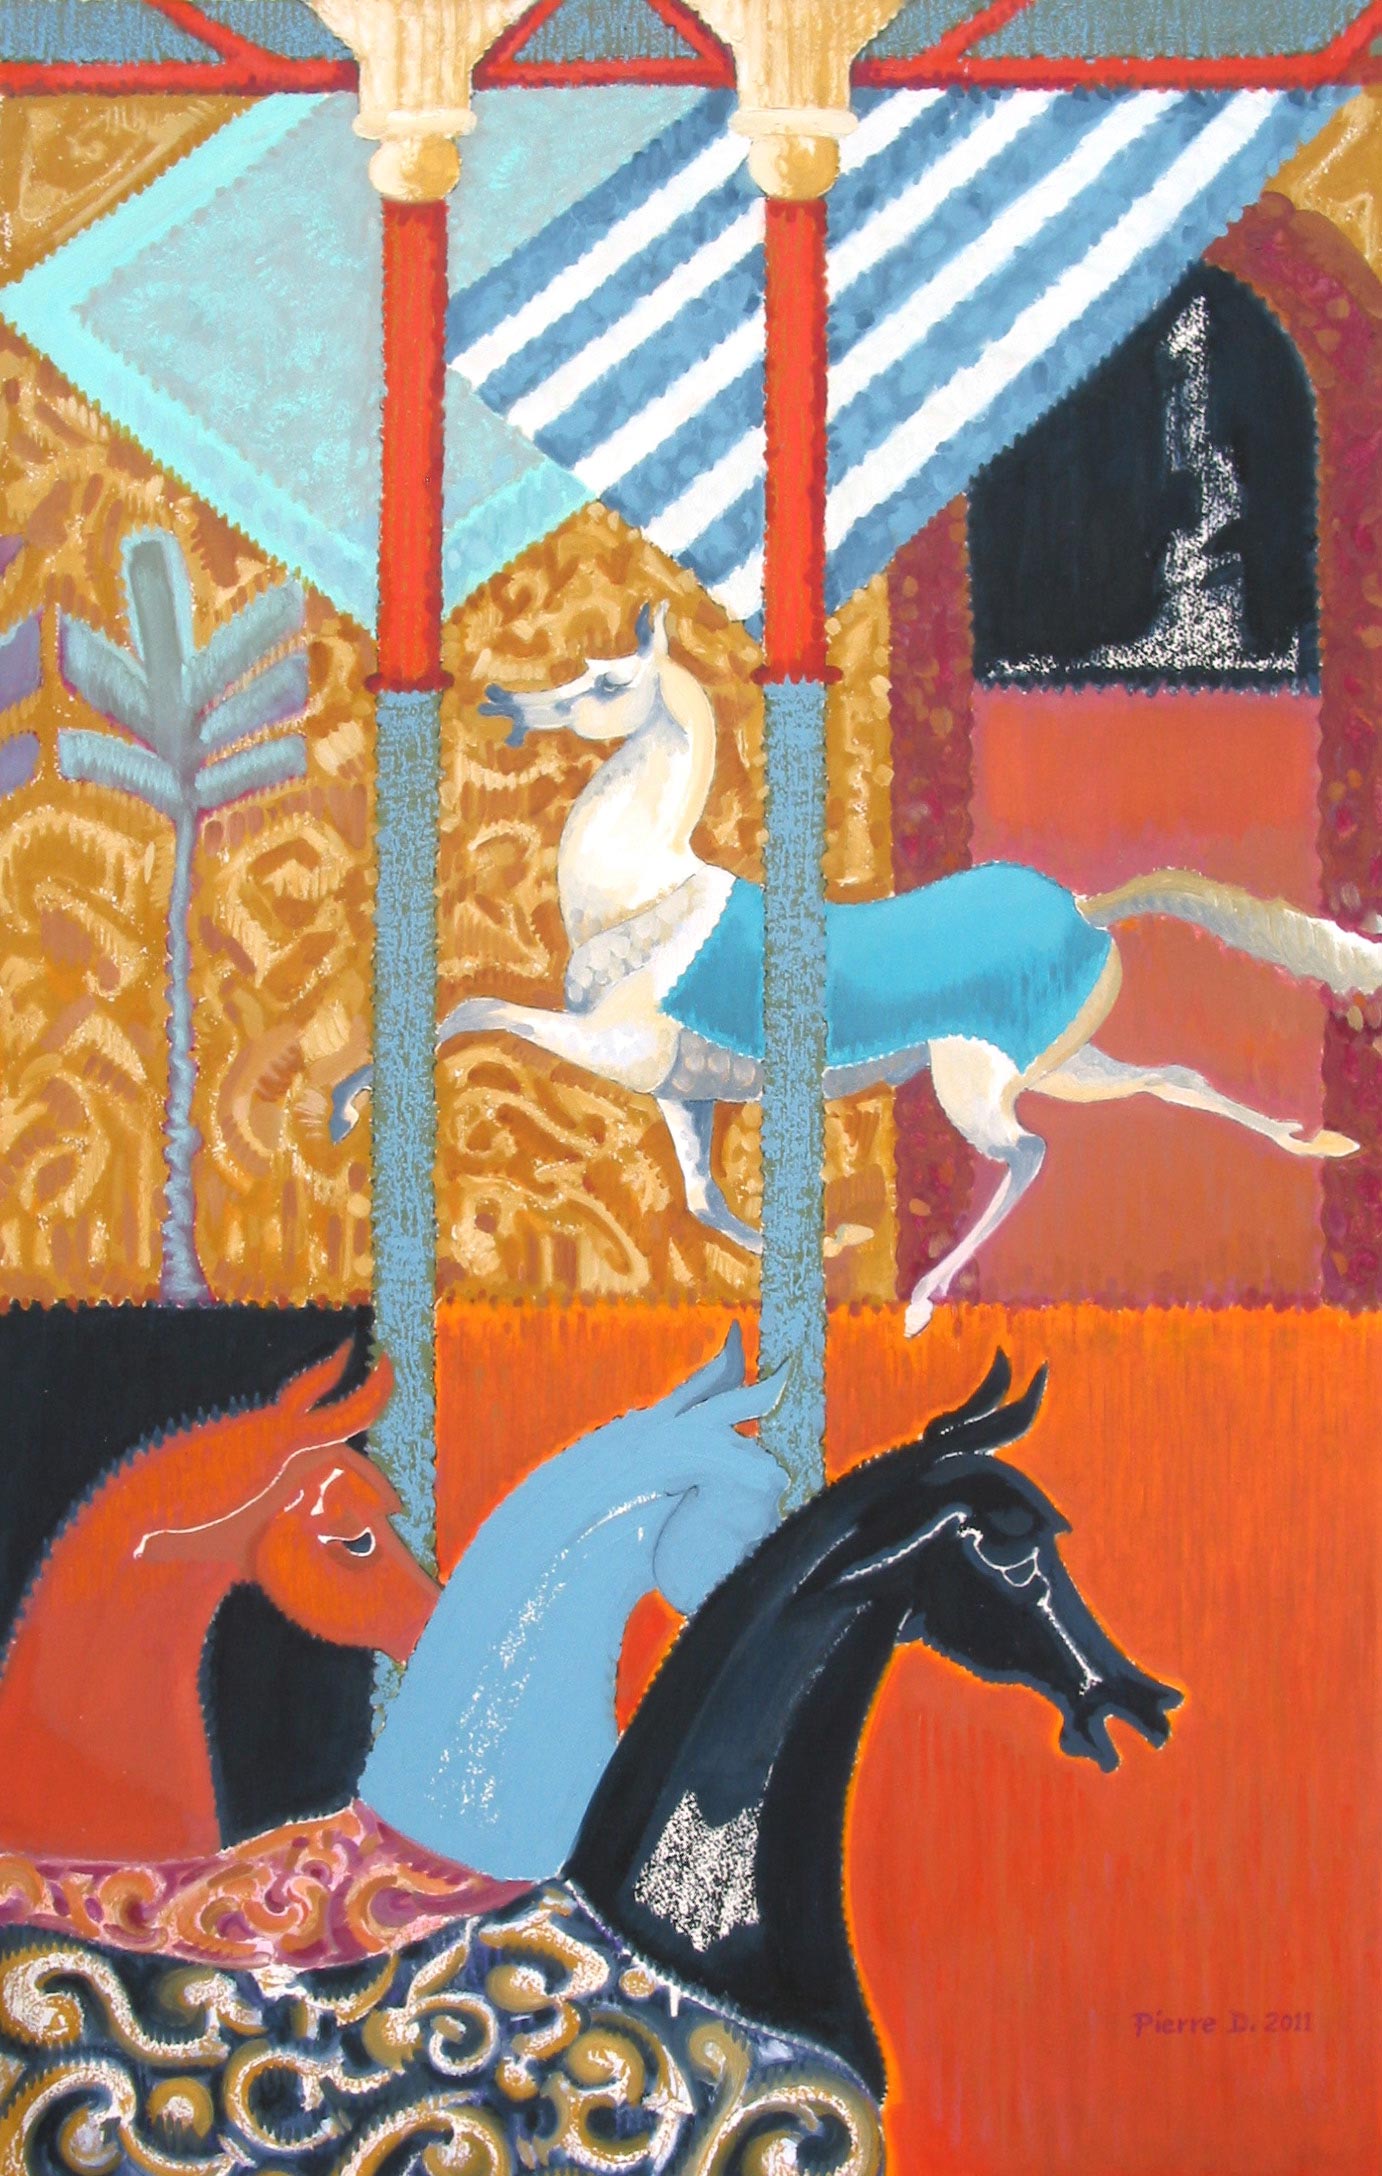  Moghul ll The Turquoise Blanket &nbsp; ©  Oil on fine paper  96 cm high x 61.5 cm wide  A freer horse against a flat, frieze of richly blanketed horses in the foreground, with stark, striped awnings and a brocade backdrop - the composition is a patc